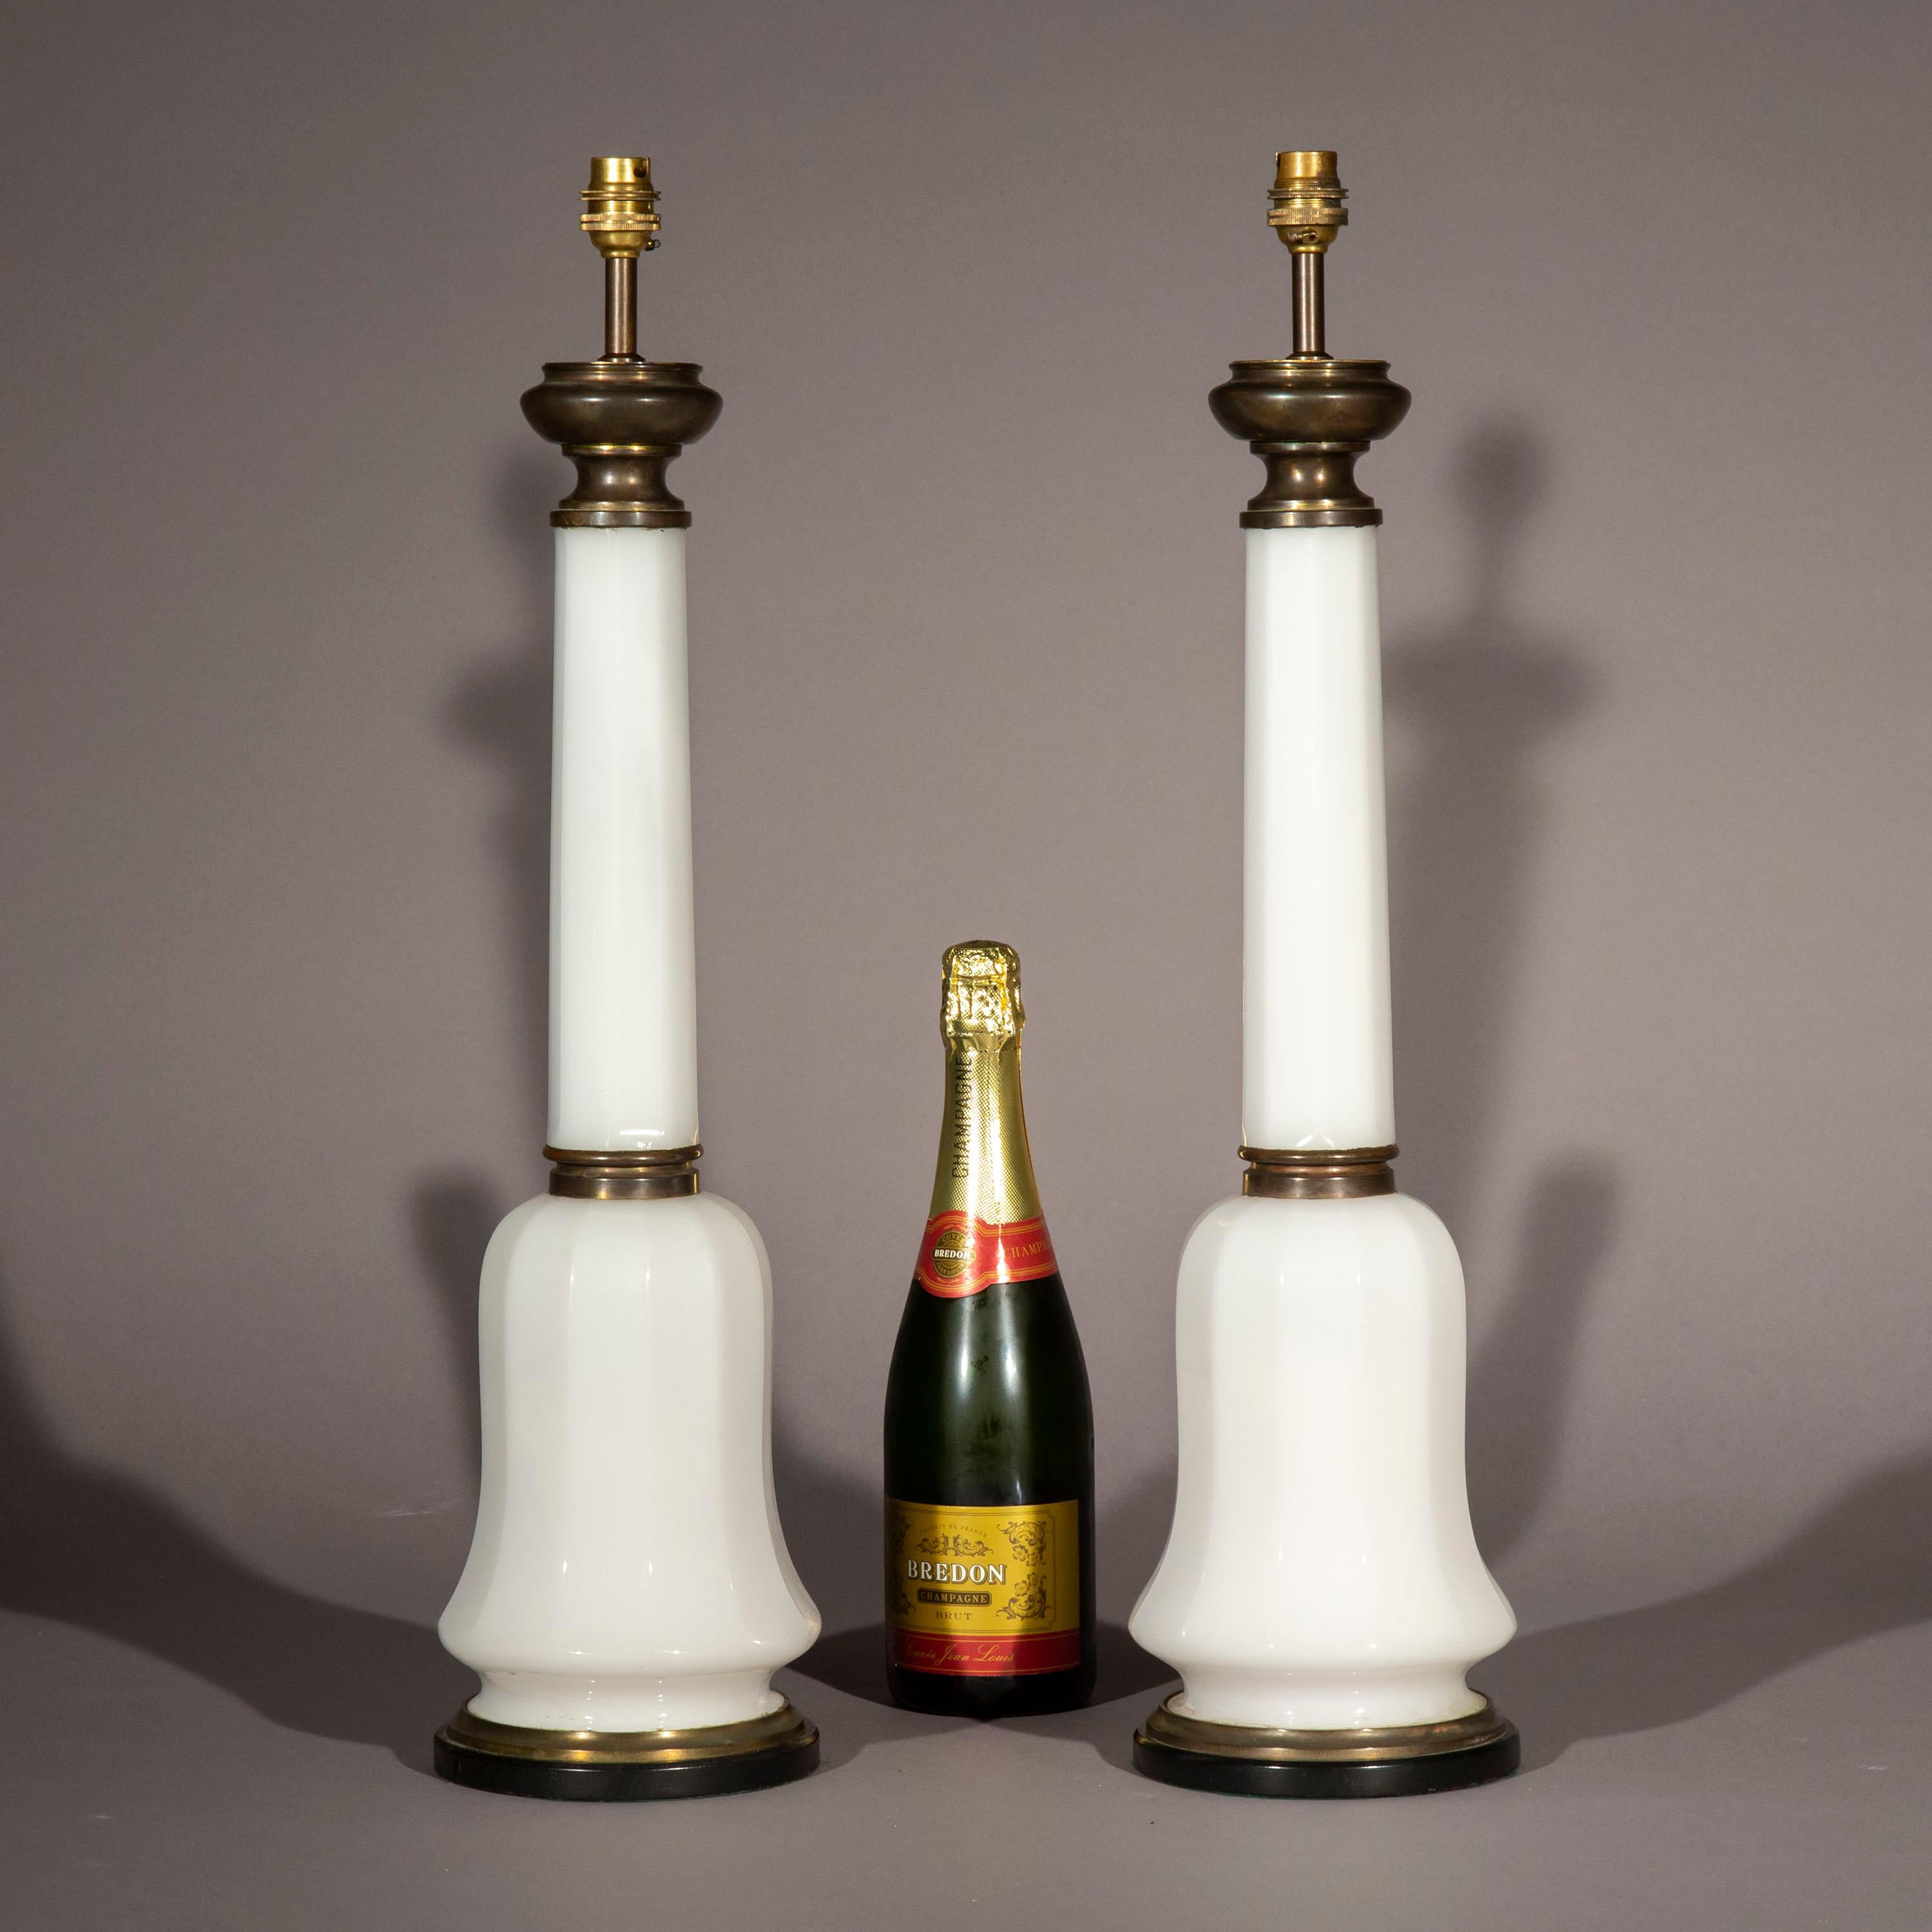 A handsome tall pair of white opaline glass and bronze table lamps, formerly Victorian oil lamps, now converted to electricity. Stand at 26.5 in / 67.5 cm tall.
Third quarter of the 19th century.

Why we like them
Their clean, timeless design,